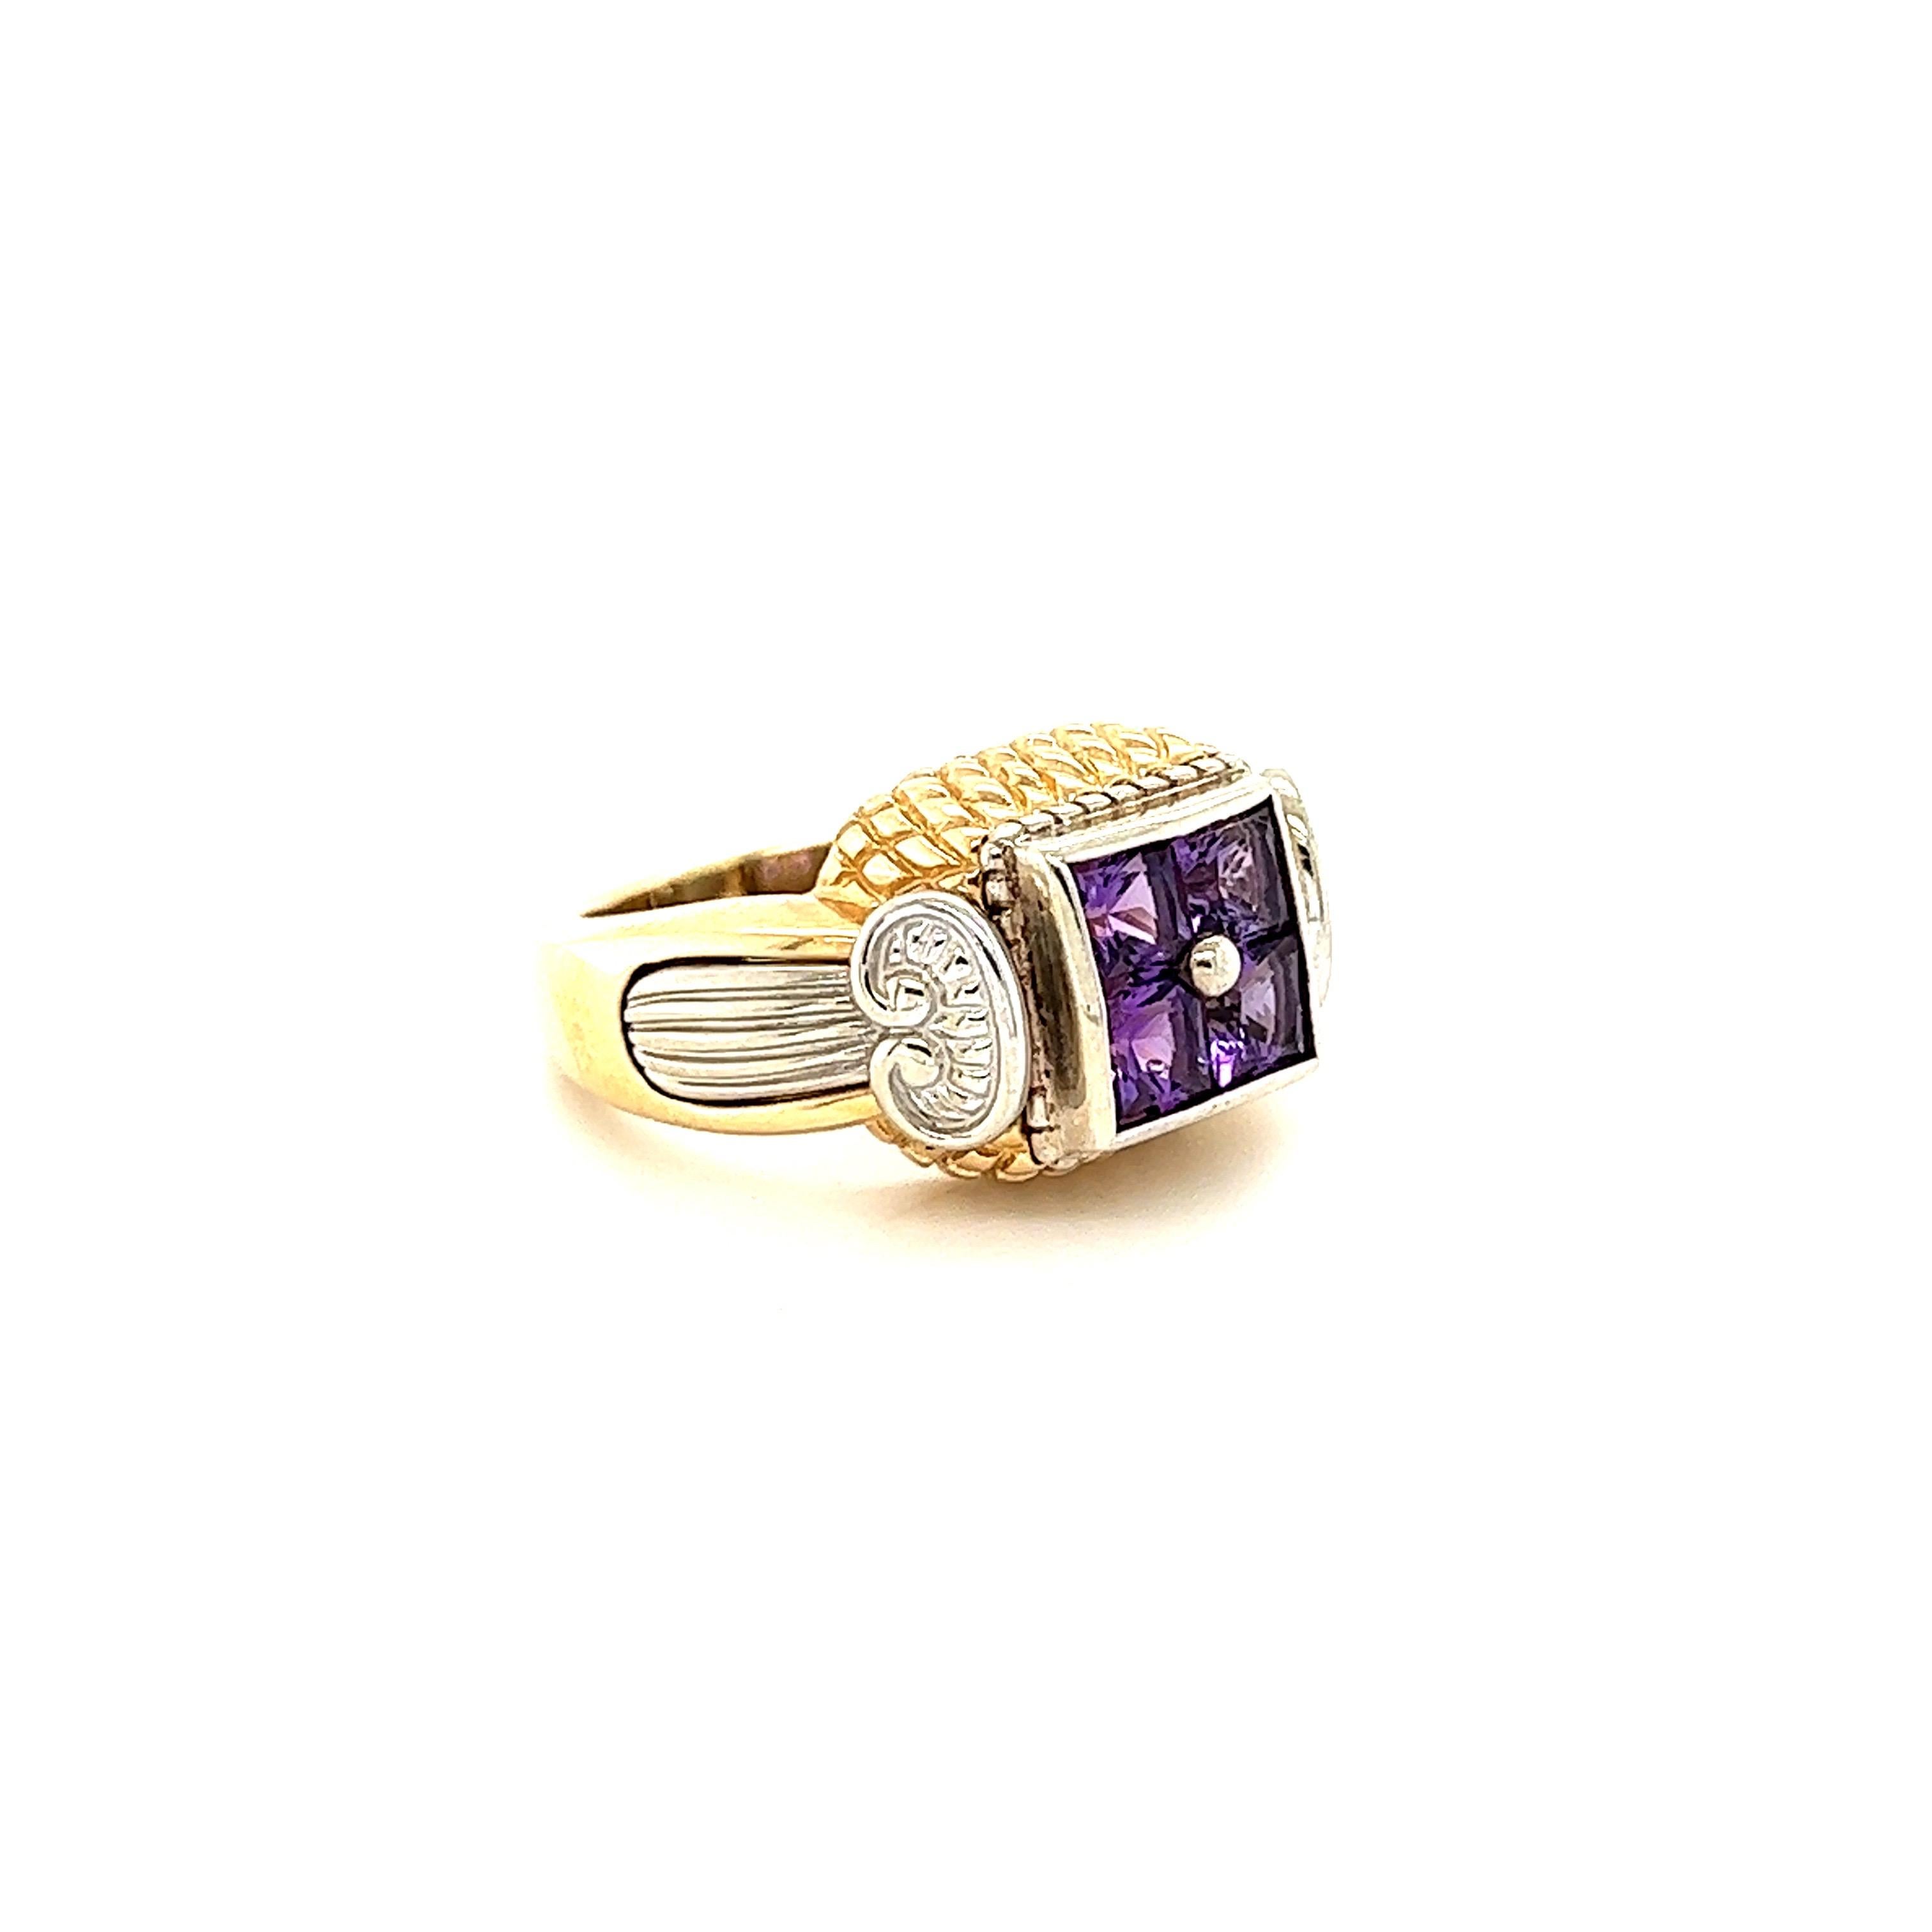 This ring has 4 Square Cut Amethysts that weigh 1.35 Carats. 
The approximate gold gram of this ring is 13.0 grams and has two-toned colors of gold. 

The thickness of the ring is 13 mm. 

The ring is a size 7 and can be re-sized at no additional